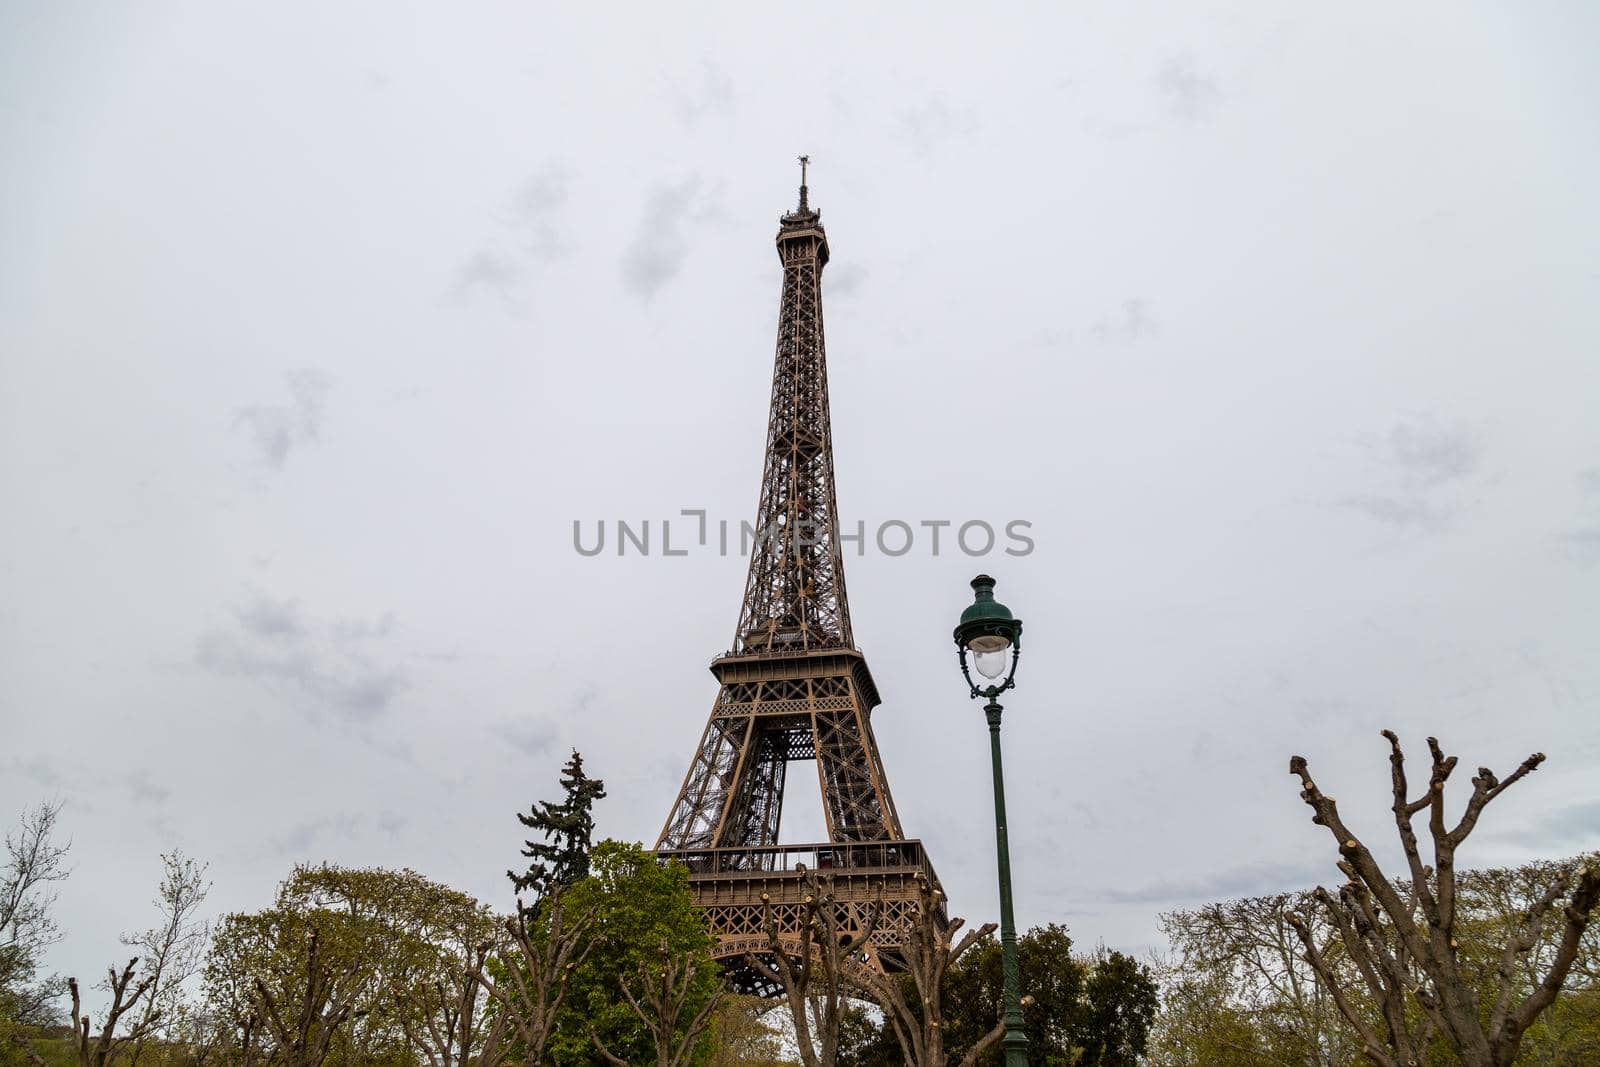 View at Eiffel Tower in Paris, France with trees and street lamp in the foreground